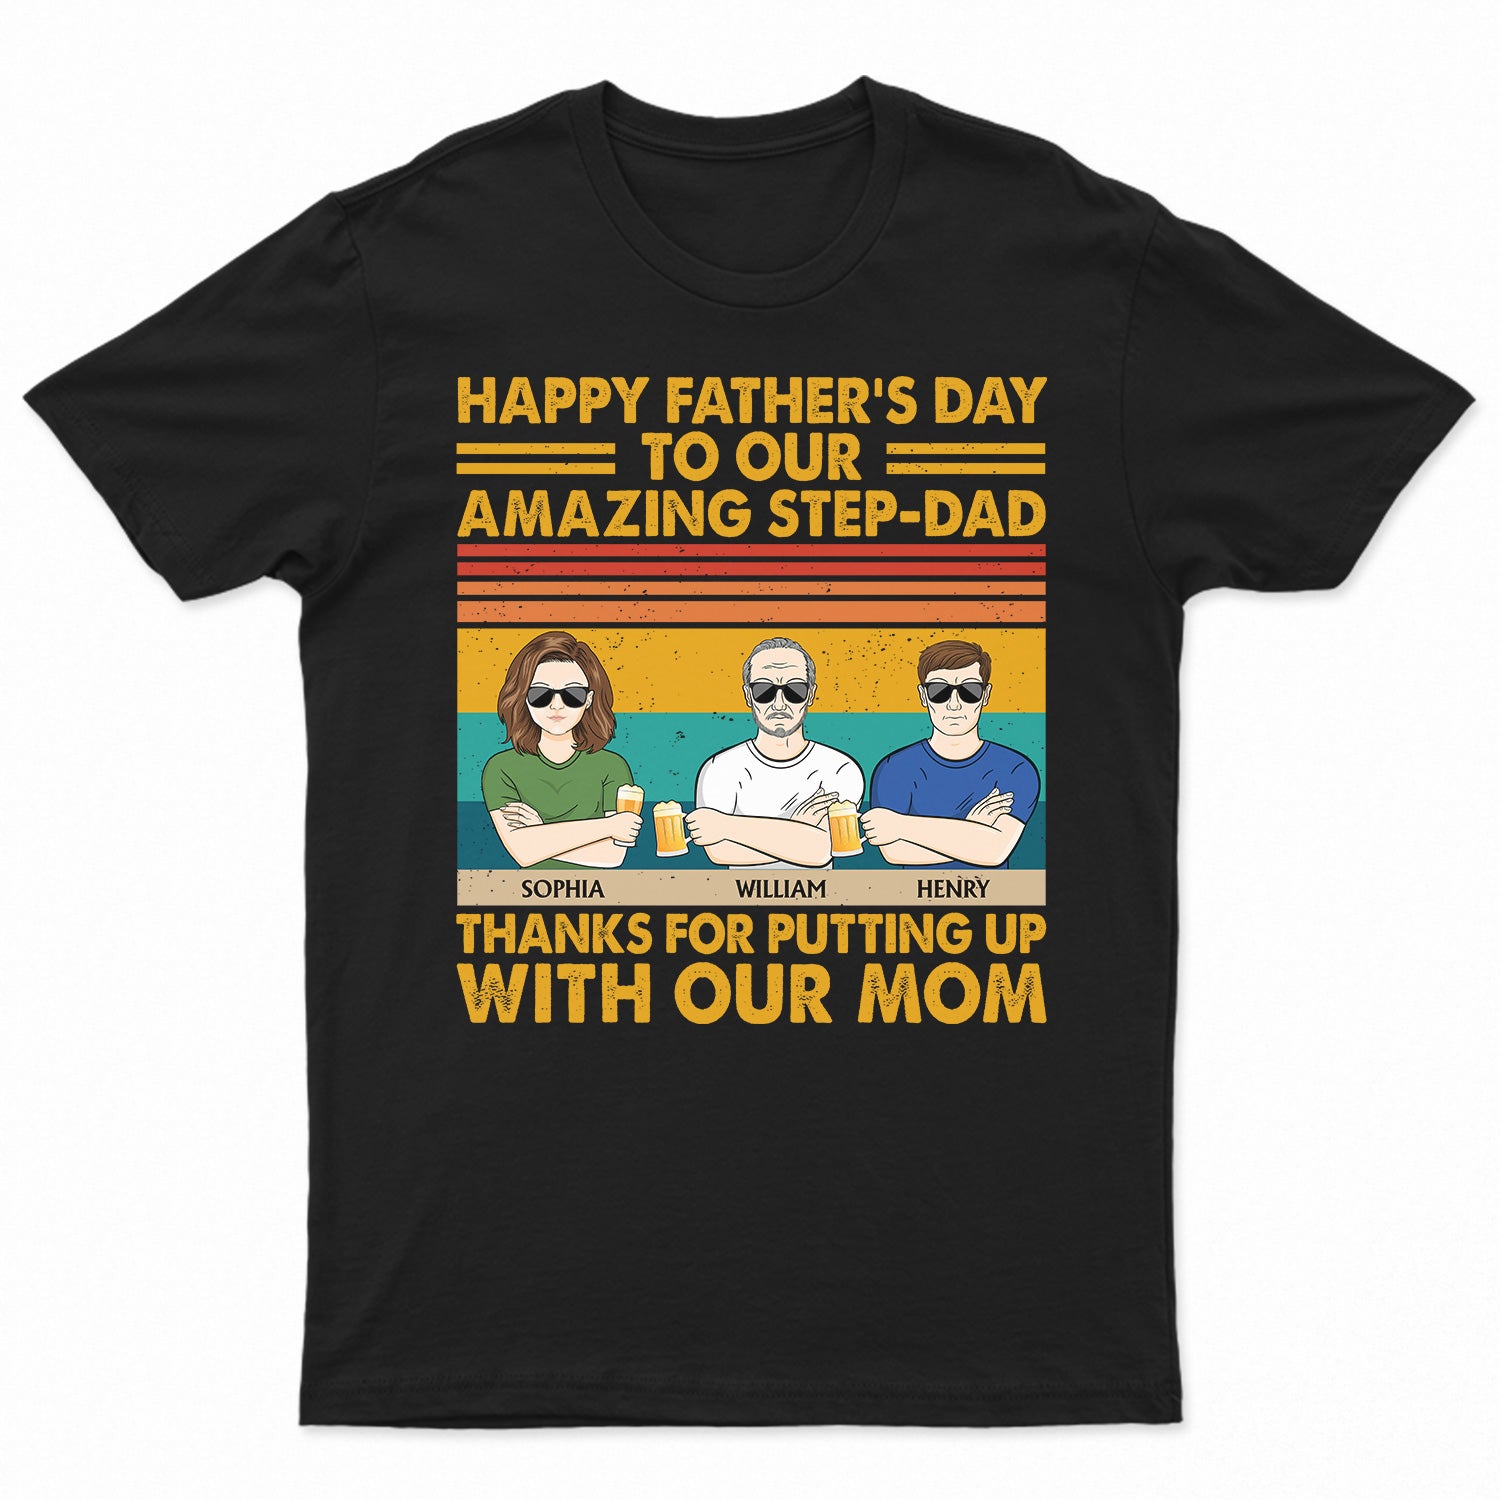 To Our Amazing Step-Dad Thanks For Putting Up With Our Mom Adult Children - Funny, Birthday Gift For Father, Papa, Husband - Personalized Custom T Shirt